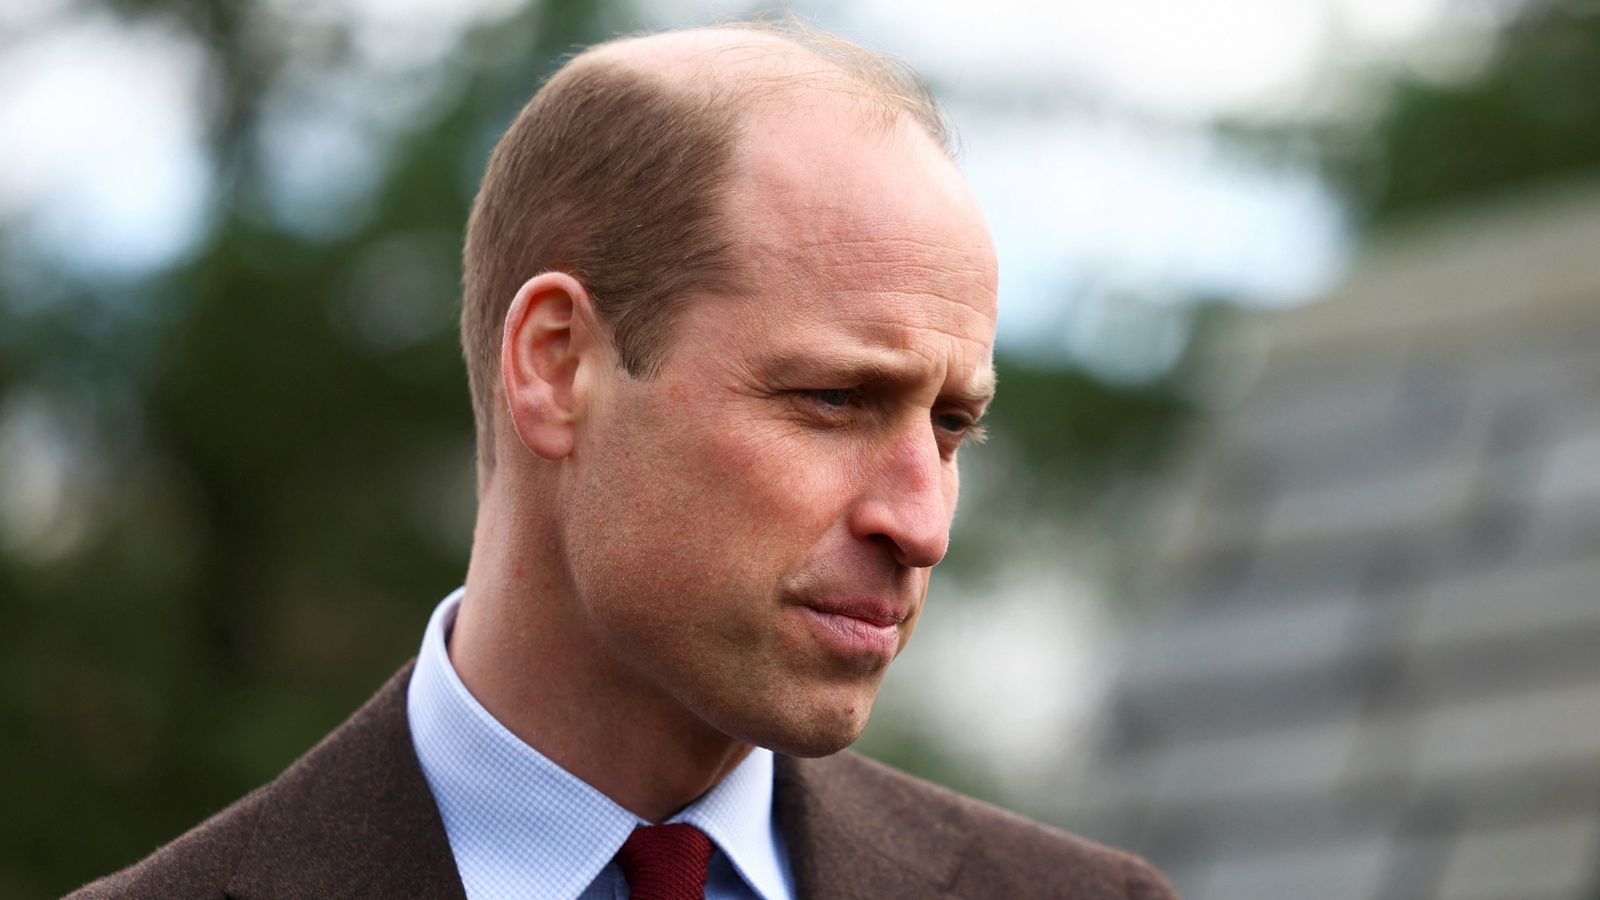 Prince William Biography: Nationality, Parents, Age, Wife, Net Worth, Height, Kids, News